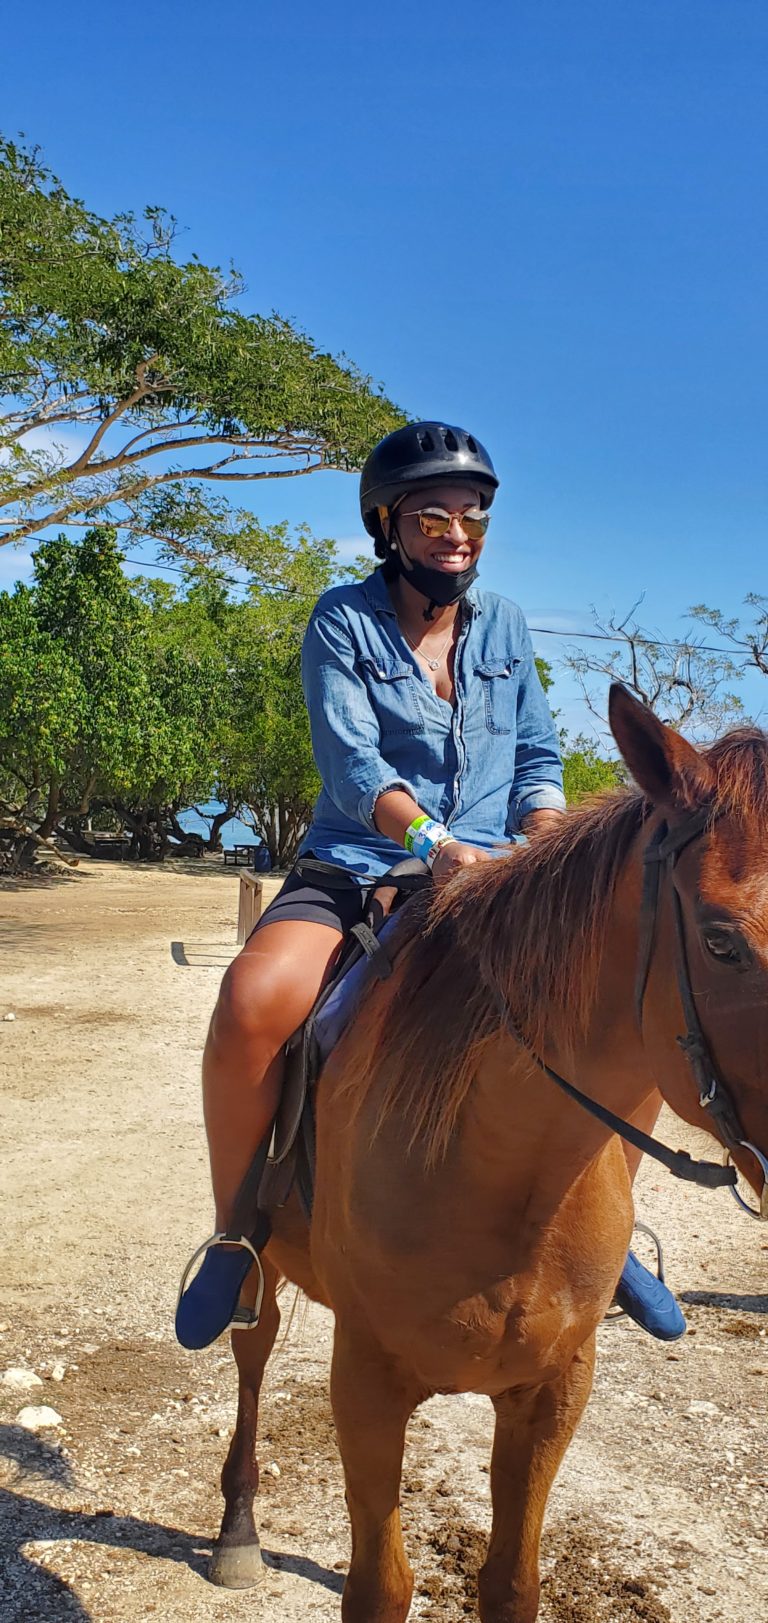 Black woman with a helmet on riding a horse in montego bay Jamaica